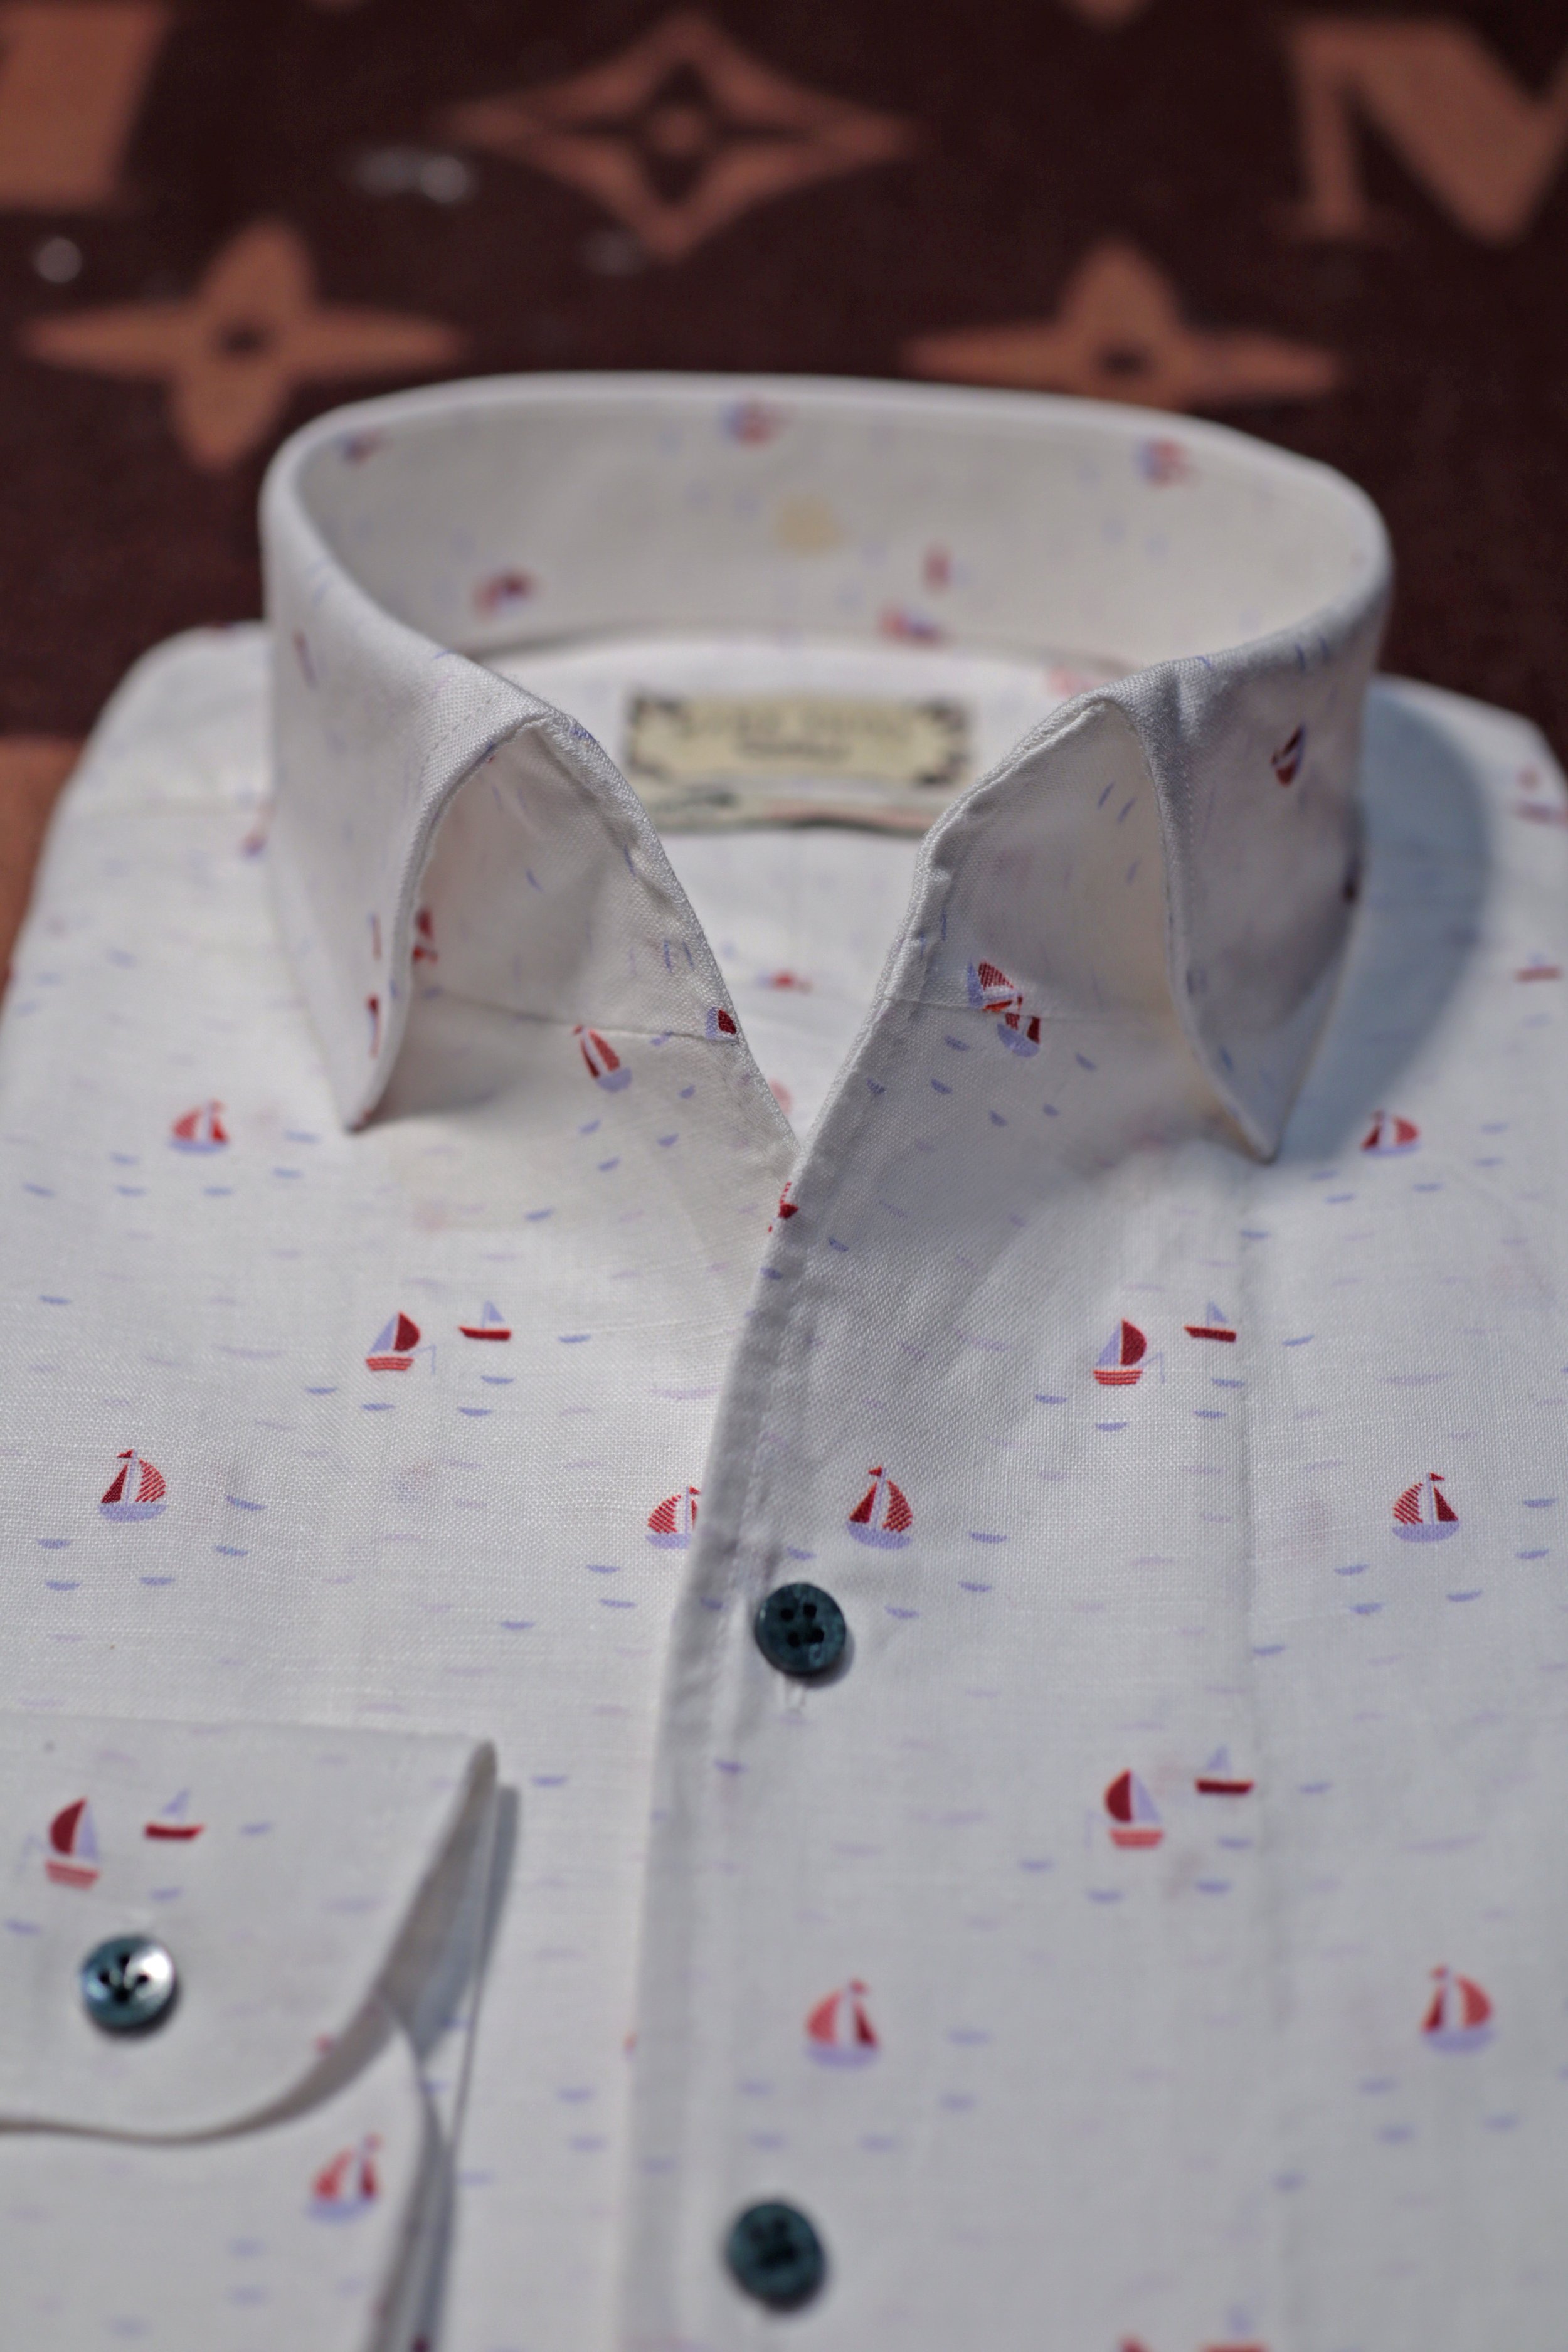 Little Boat Sidogras | One Piece Collar | Made Suits SIngapore BTM Shirts Bespoke Shirts Linen Shirts Made in Japano.JPG